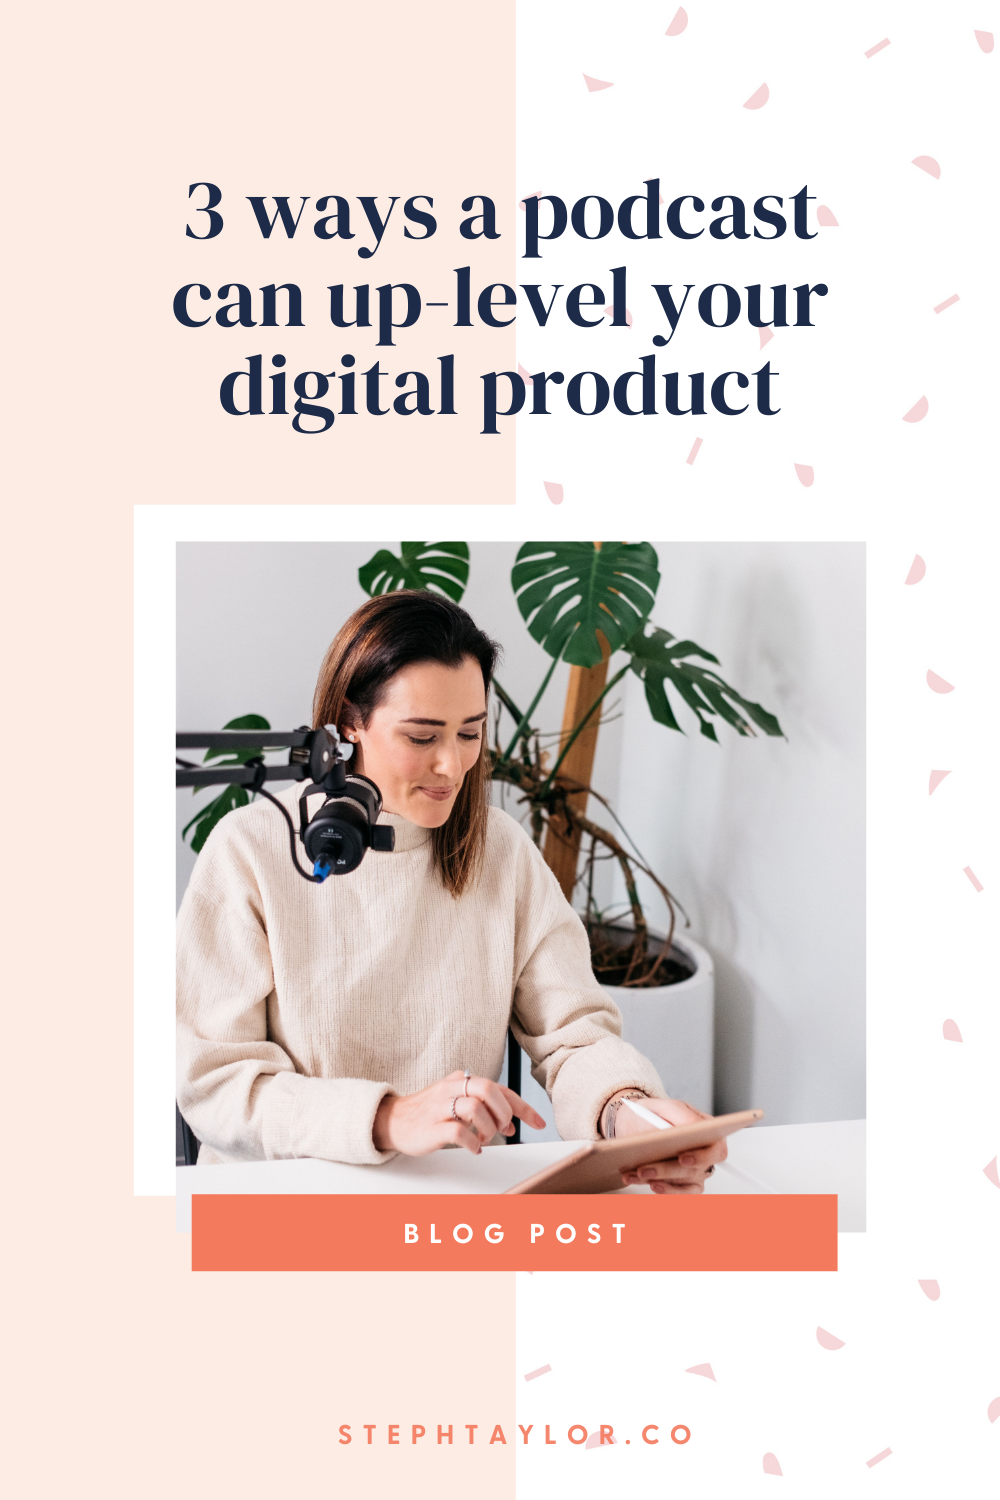 3 ways a podcast can level up your digital product